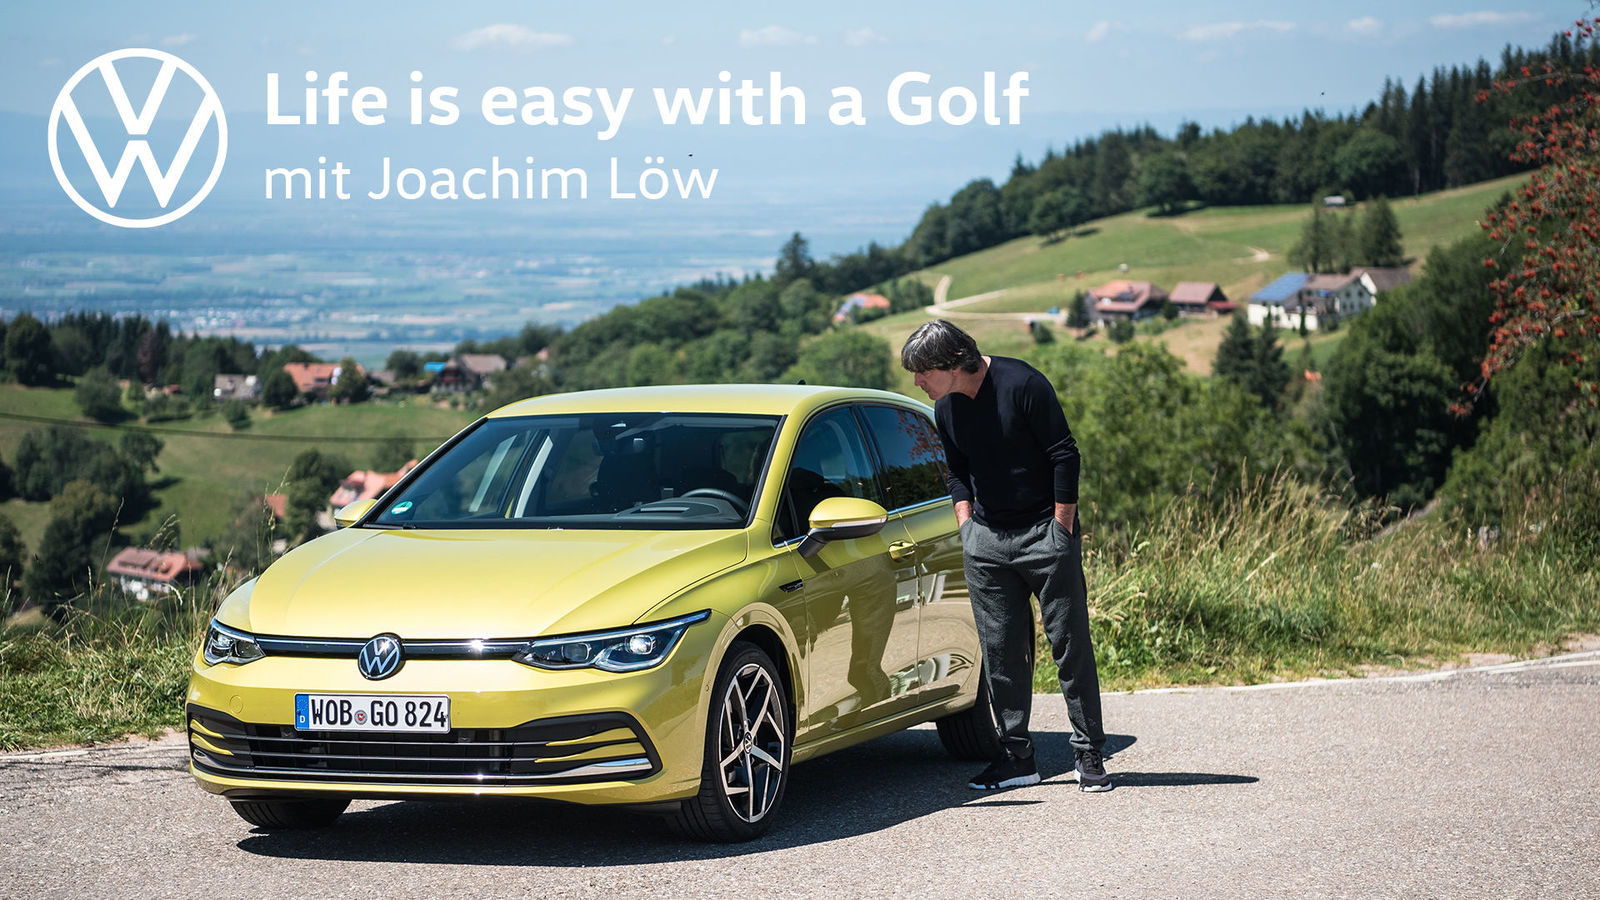 DE 0:07 / 1:49 Life is easy with a Golf – mit Joachim Löw